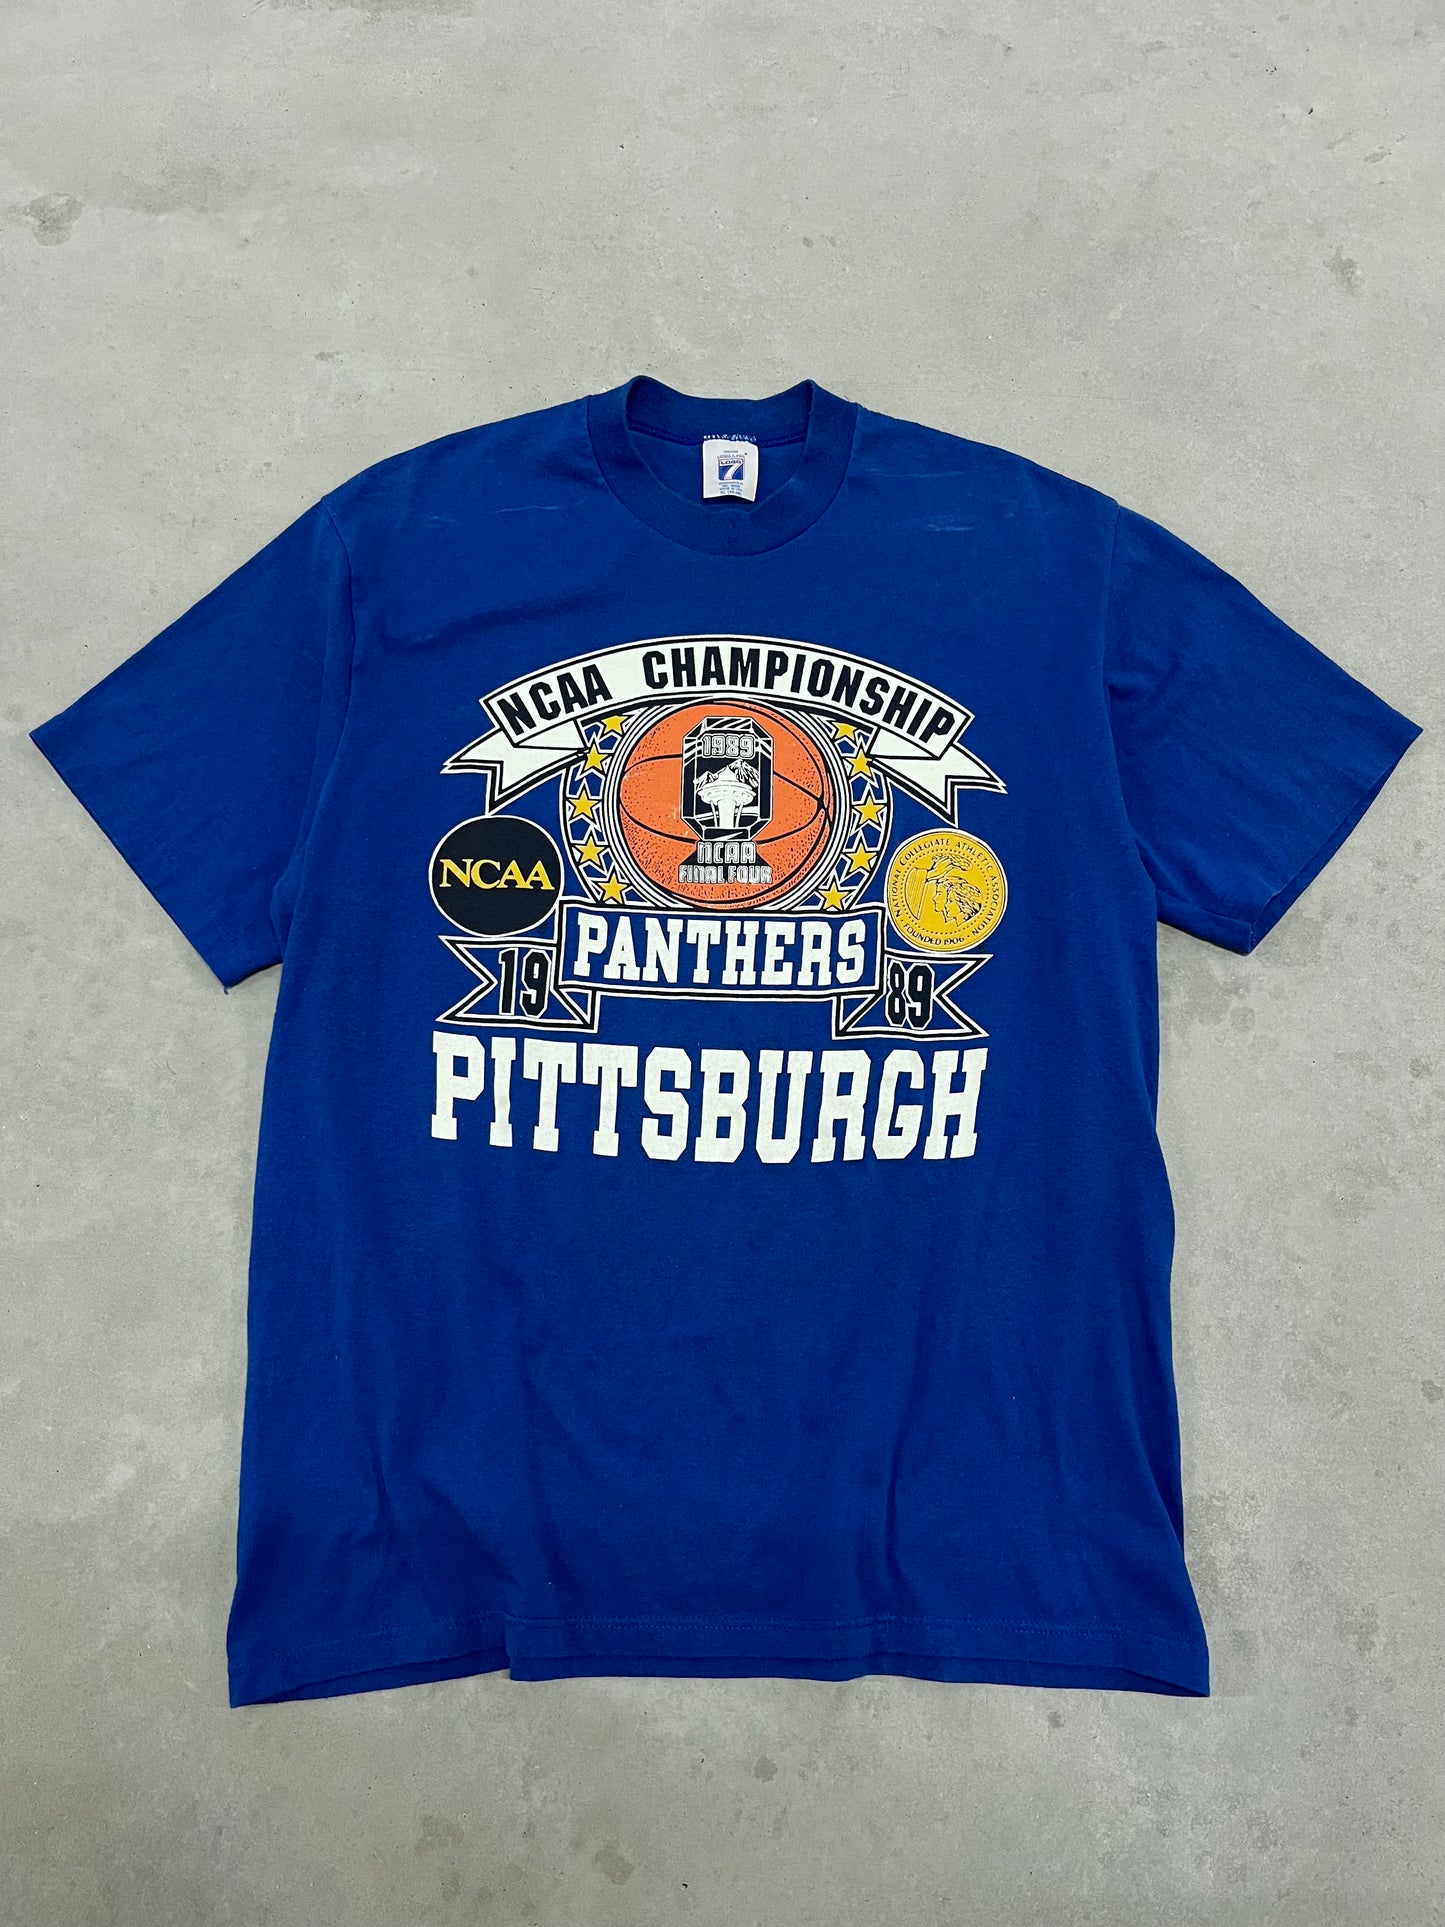 Vintage 80s NCAA Pittsburgh Panthers Championship Tee